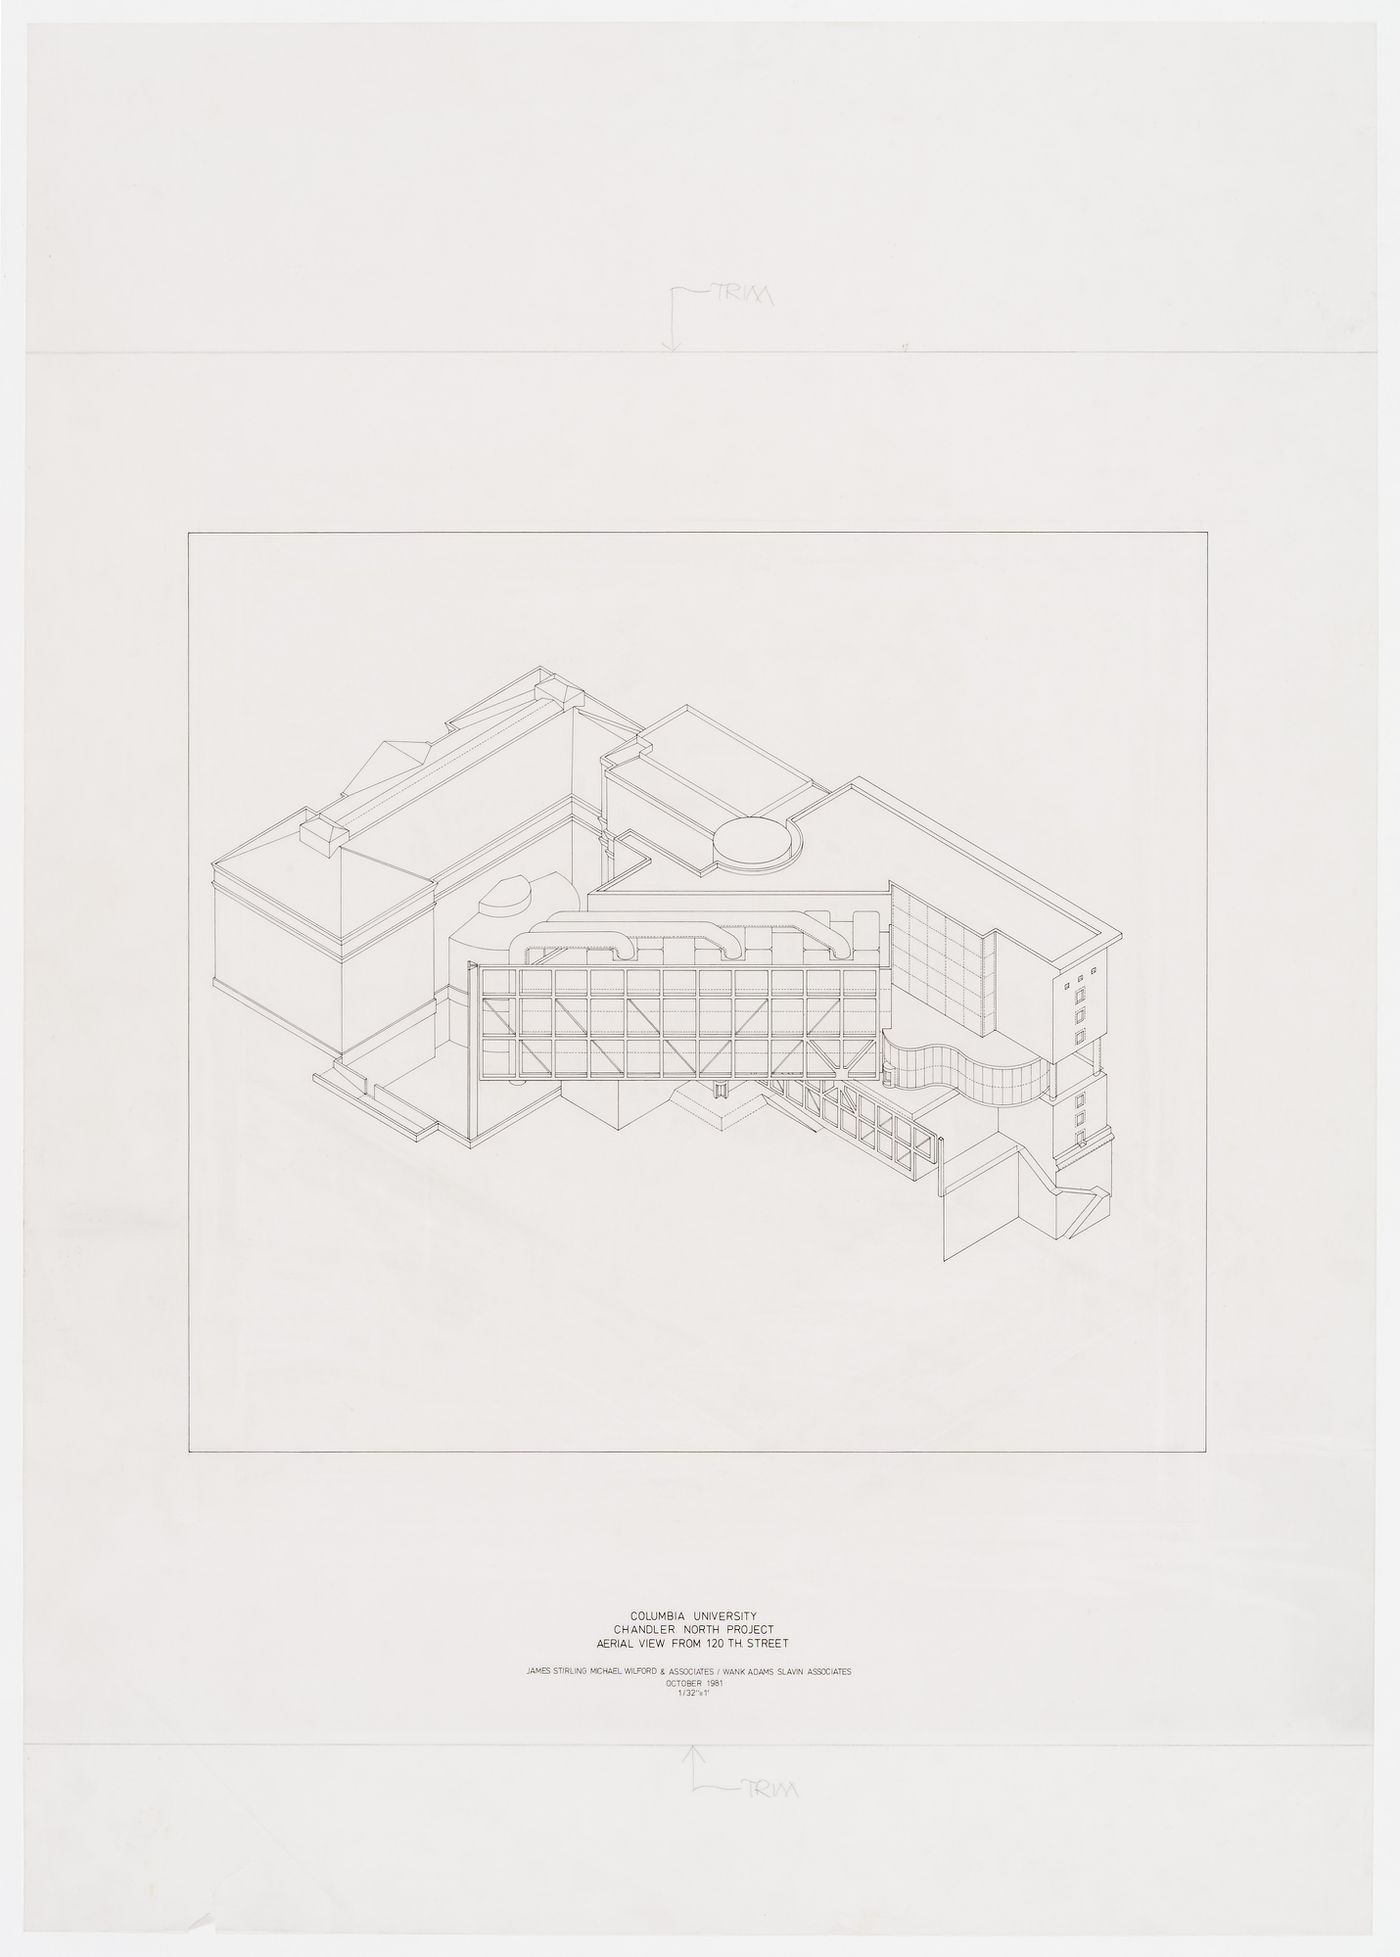 Chandler North Building, Department of Chemistry, Columbia University, New York, New York: aerial axonometric from 120th Street
